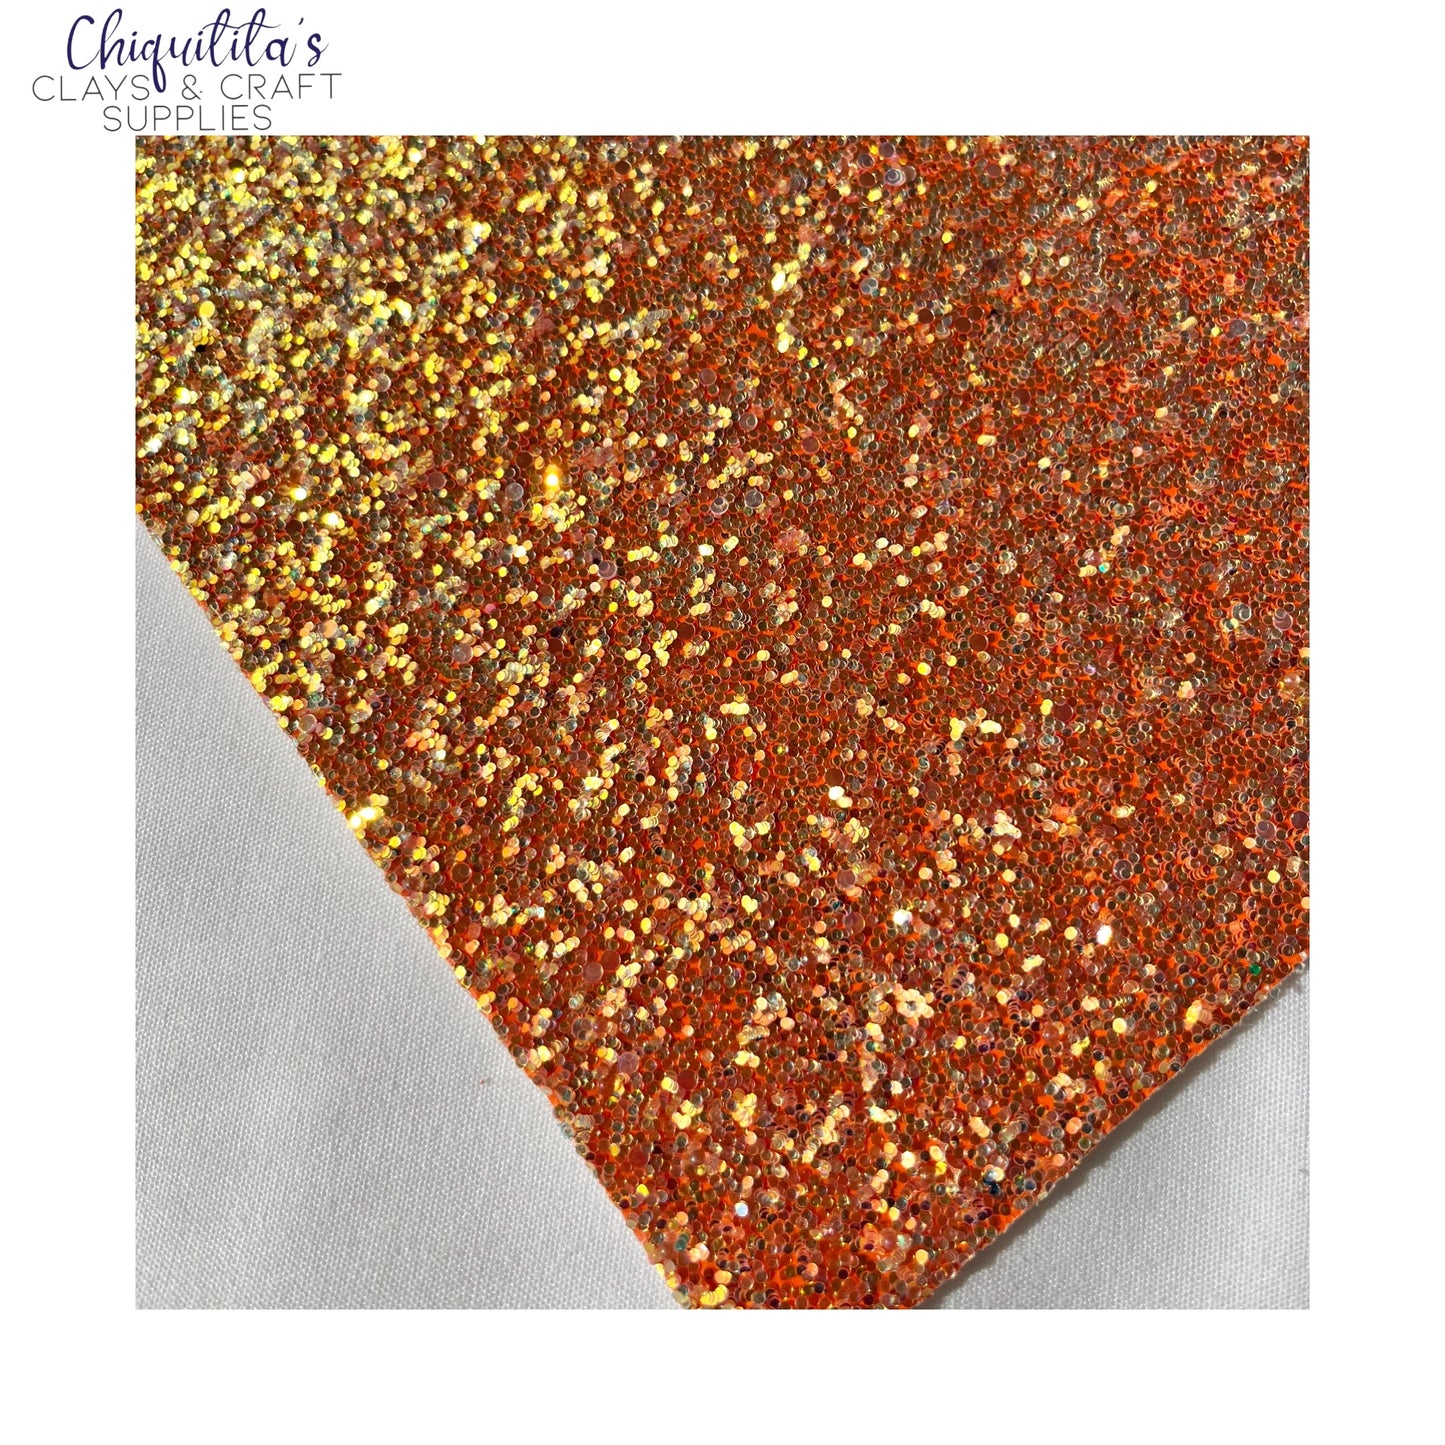 Bow Craft Supplies: Tangerine Droplets Edition- Chunky Glitter Sheet